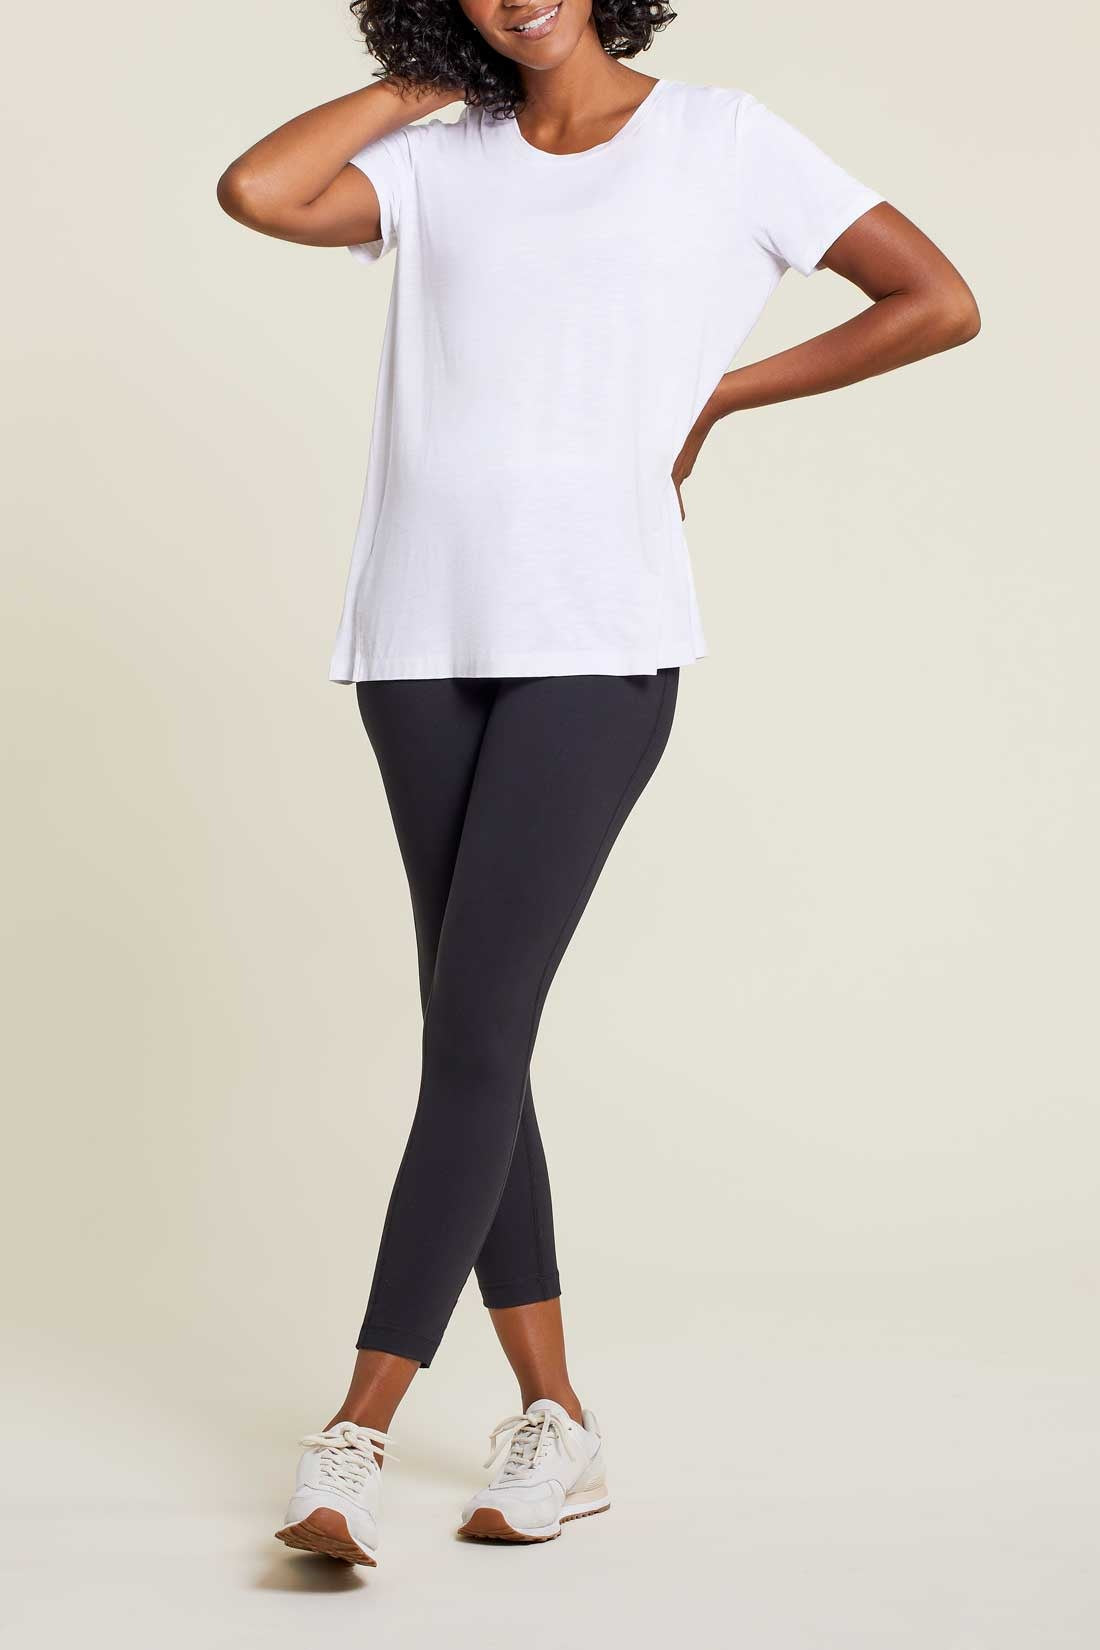 Scoop Neck Top With Back Pleats 1283O